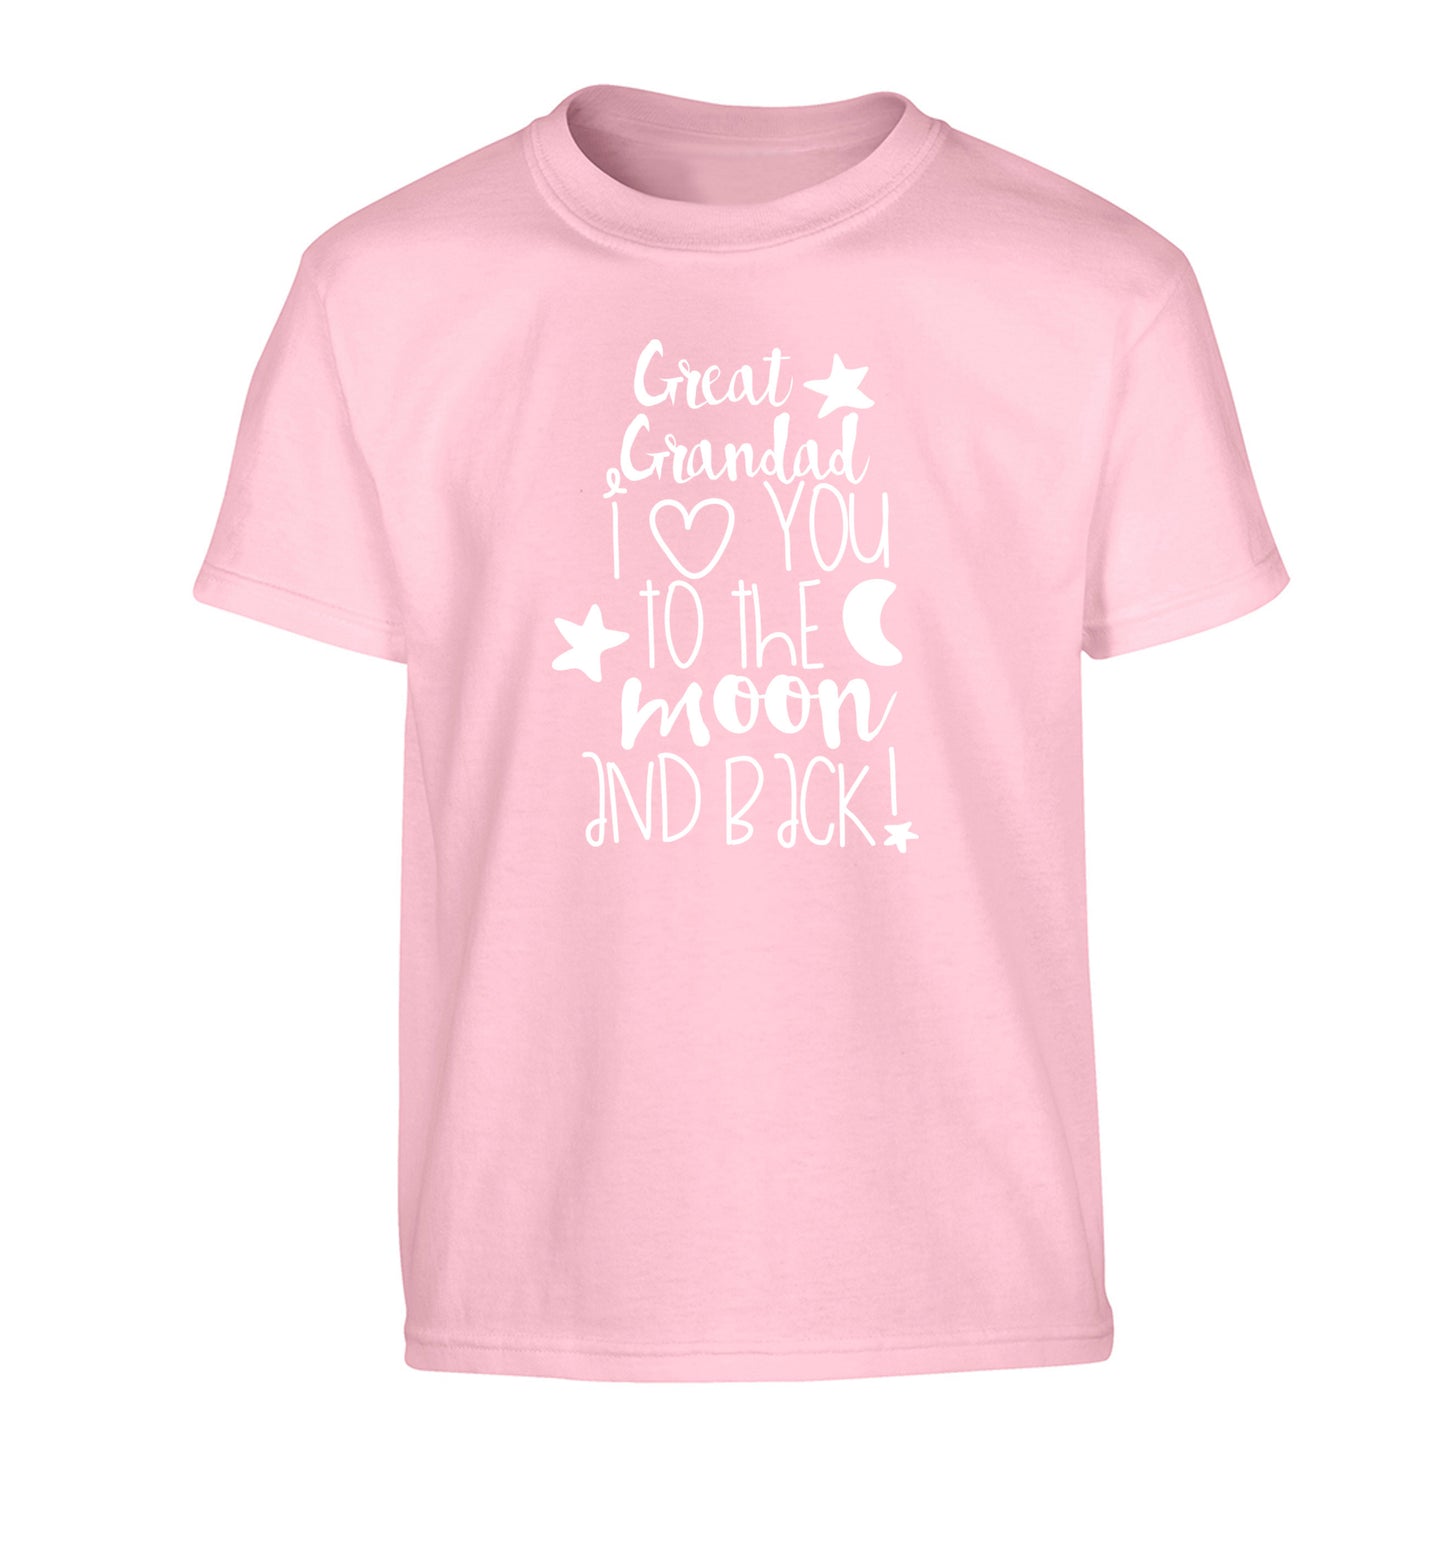 Great Grandad I love you to the moon and back Children's light pink Tshirt 12-14 Years